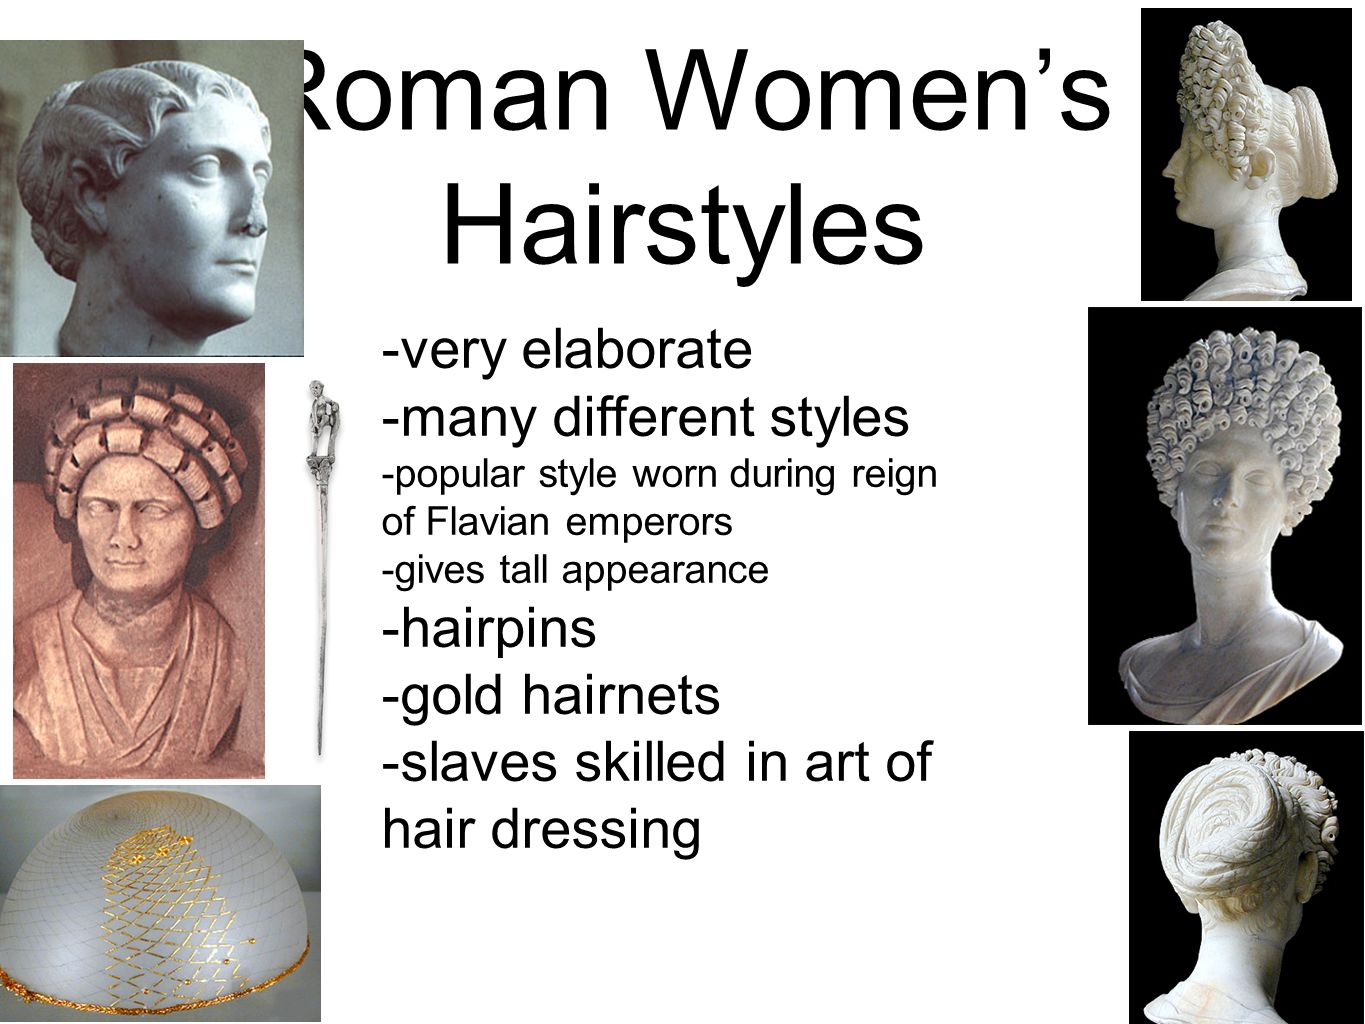 Classics For All - A Flavian Lady During the reign of the Flavian emperors  (Vespasian, AD 69–79; Titus, AD 79–81; Domitian, AD 81–96) the hairstyles  of aristocratic Roman women became most flamboyant,